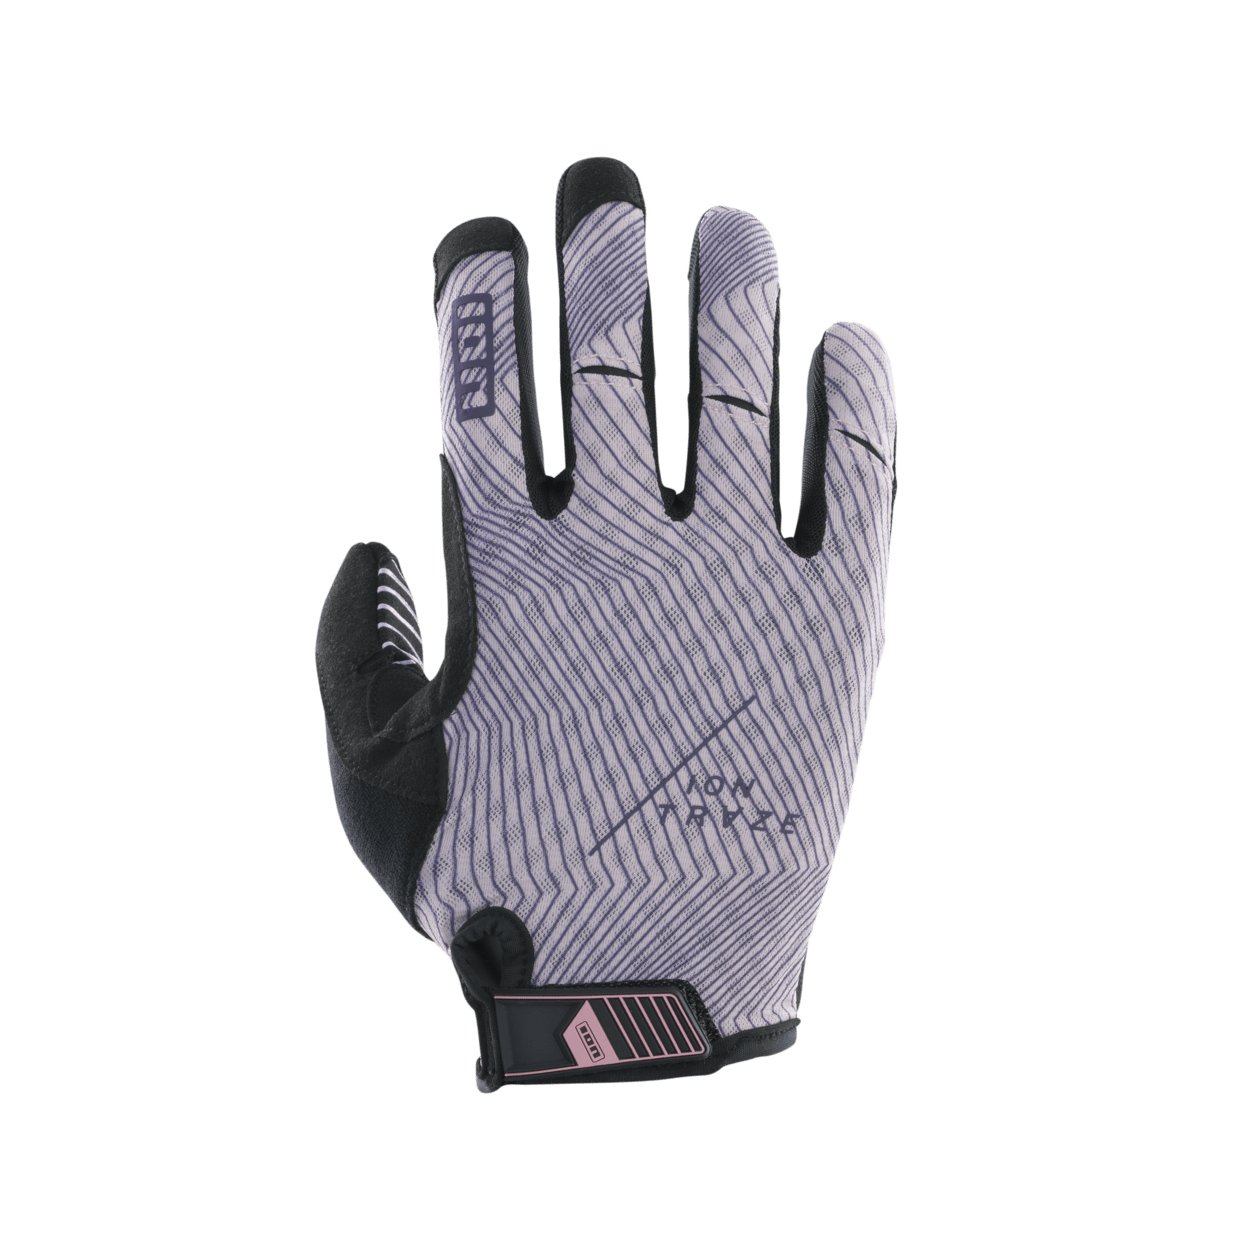 ION MTB Gloves Traze Long 2023 - Worthing Watersports - 9010583101477 - Gloves - ION Bike